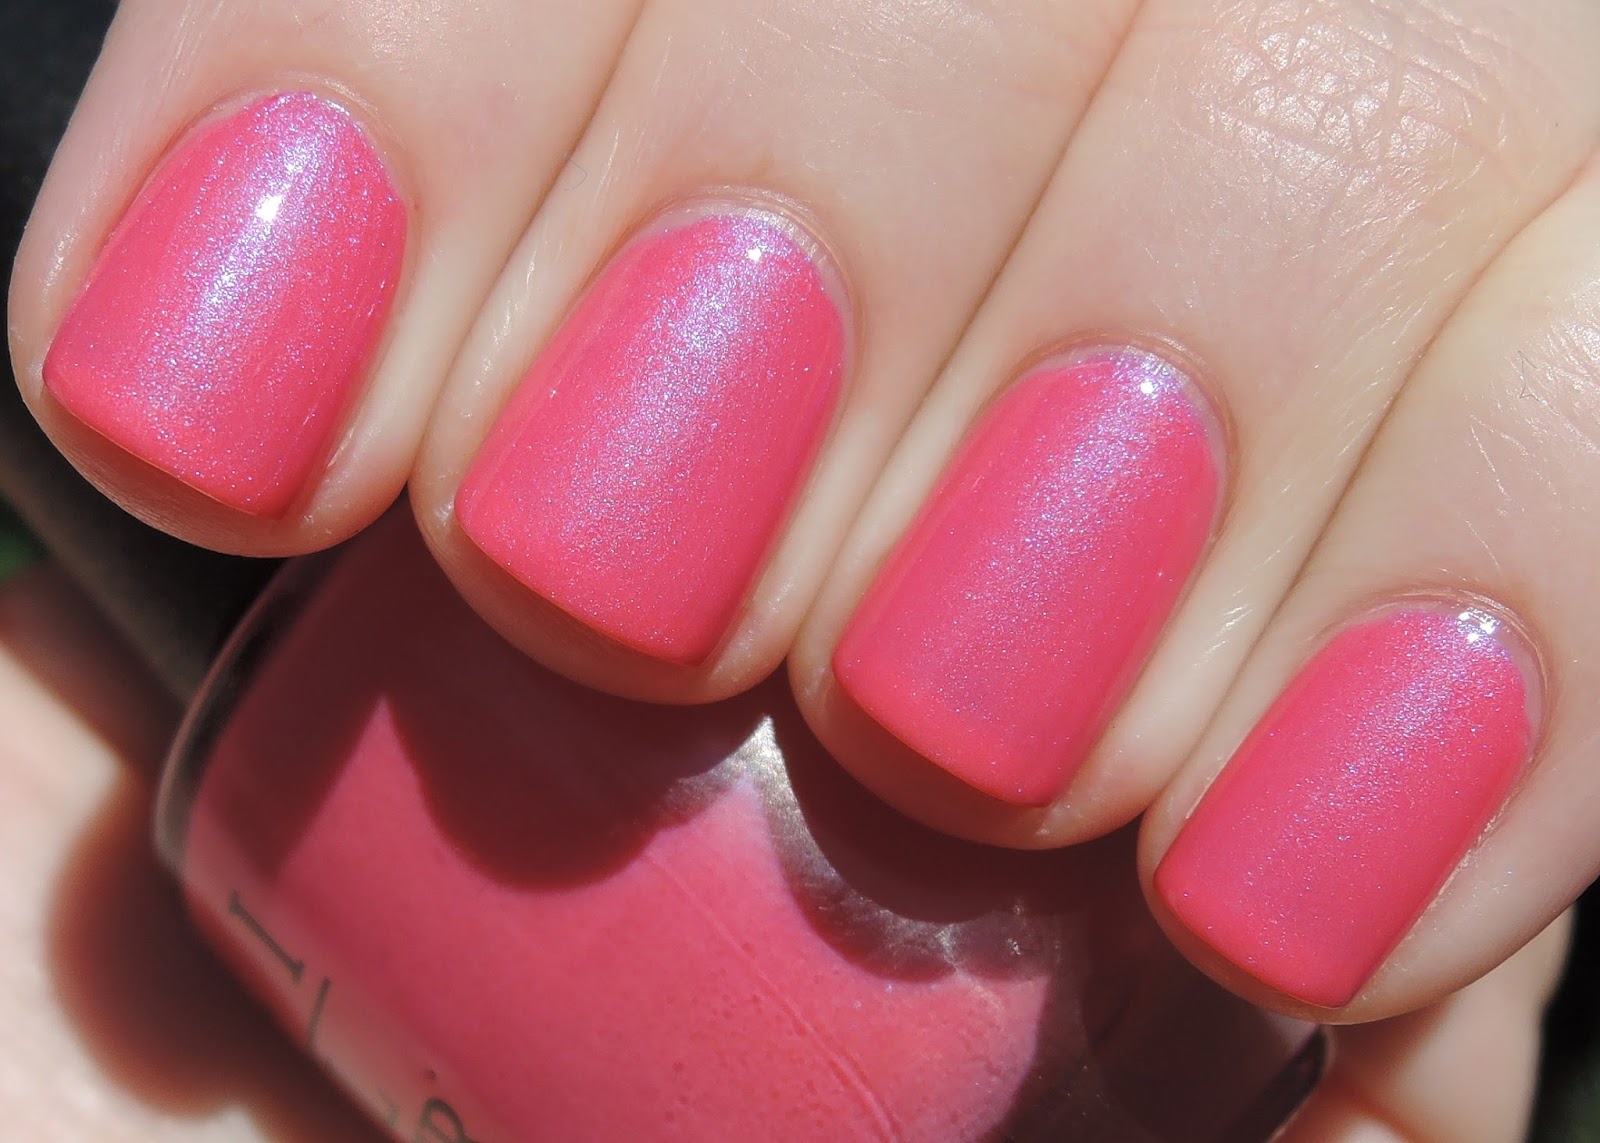 OPI Nail Lacquer in "Hotter Than You Pink" - wide 3